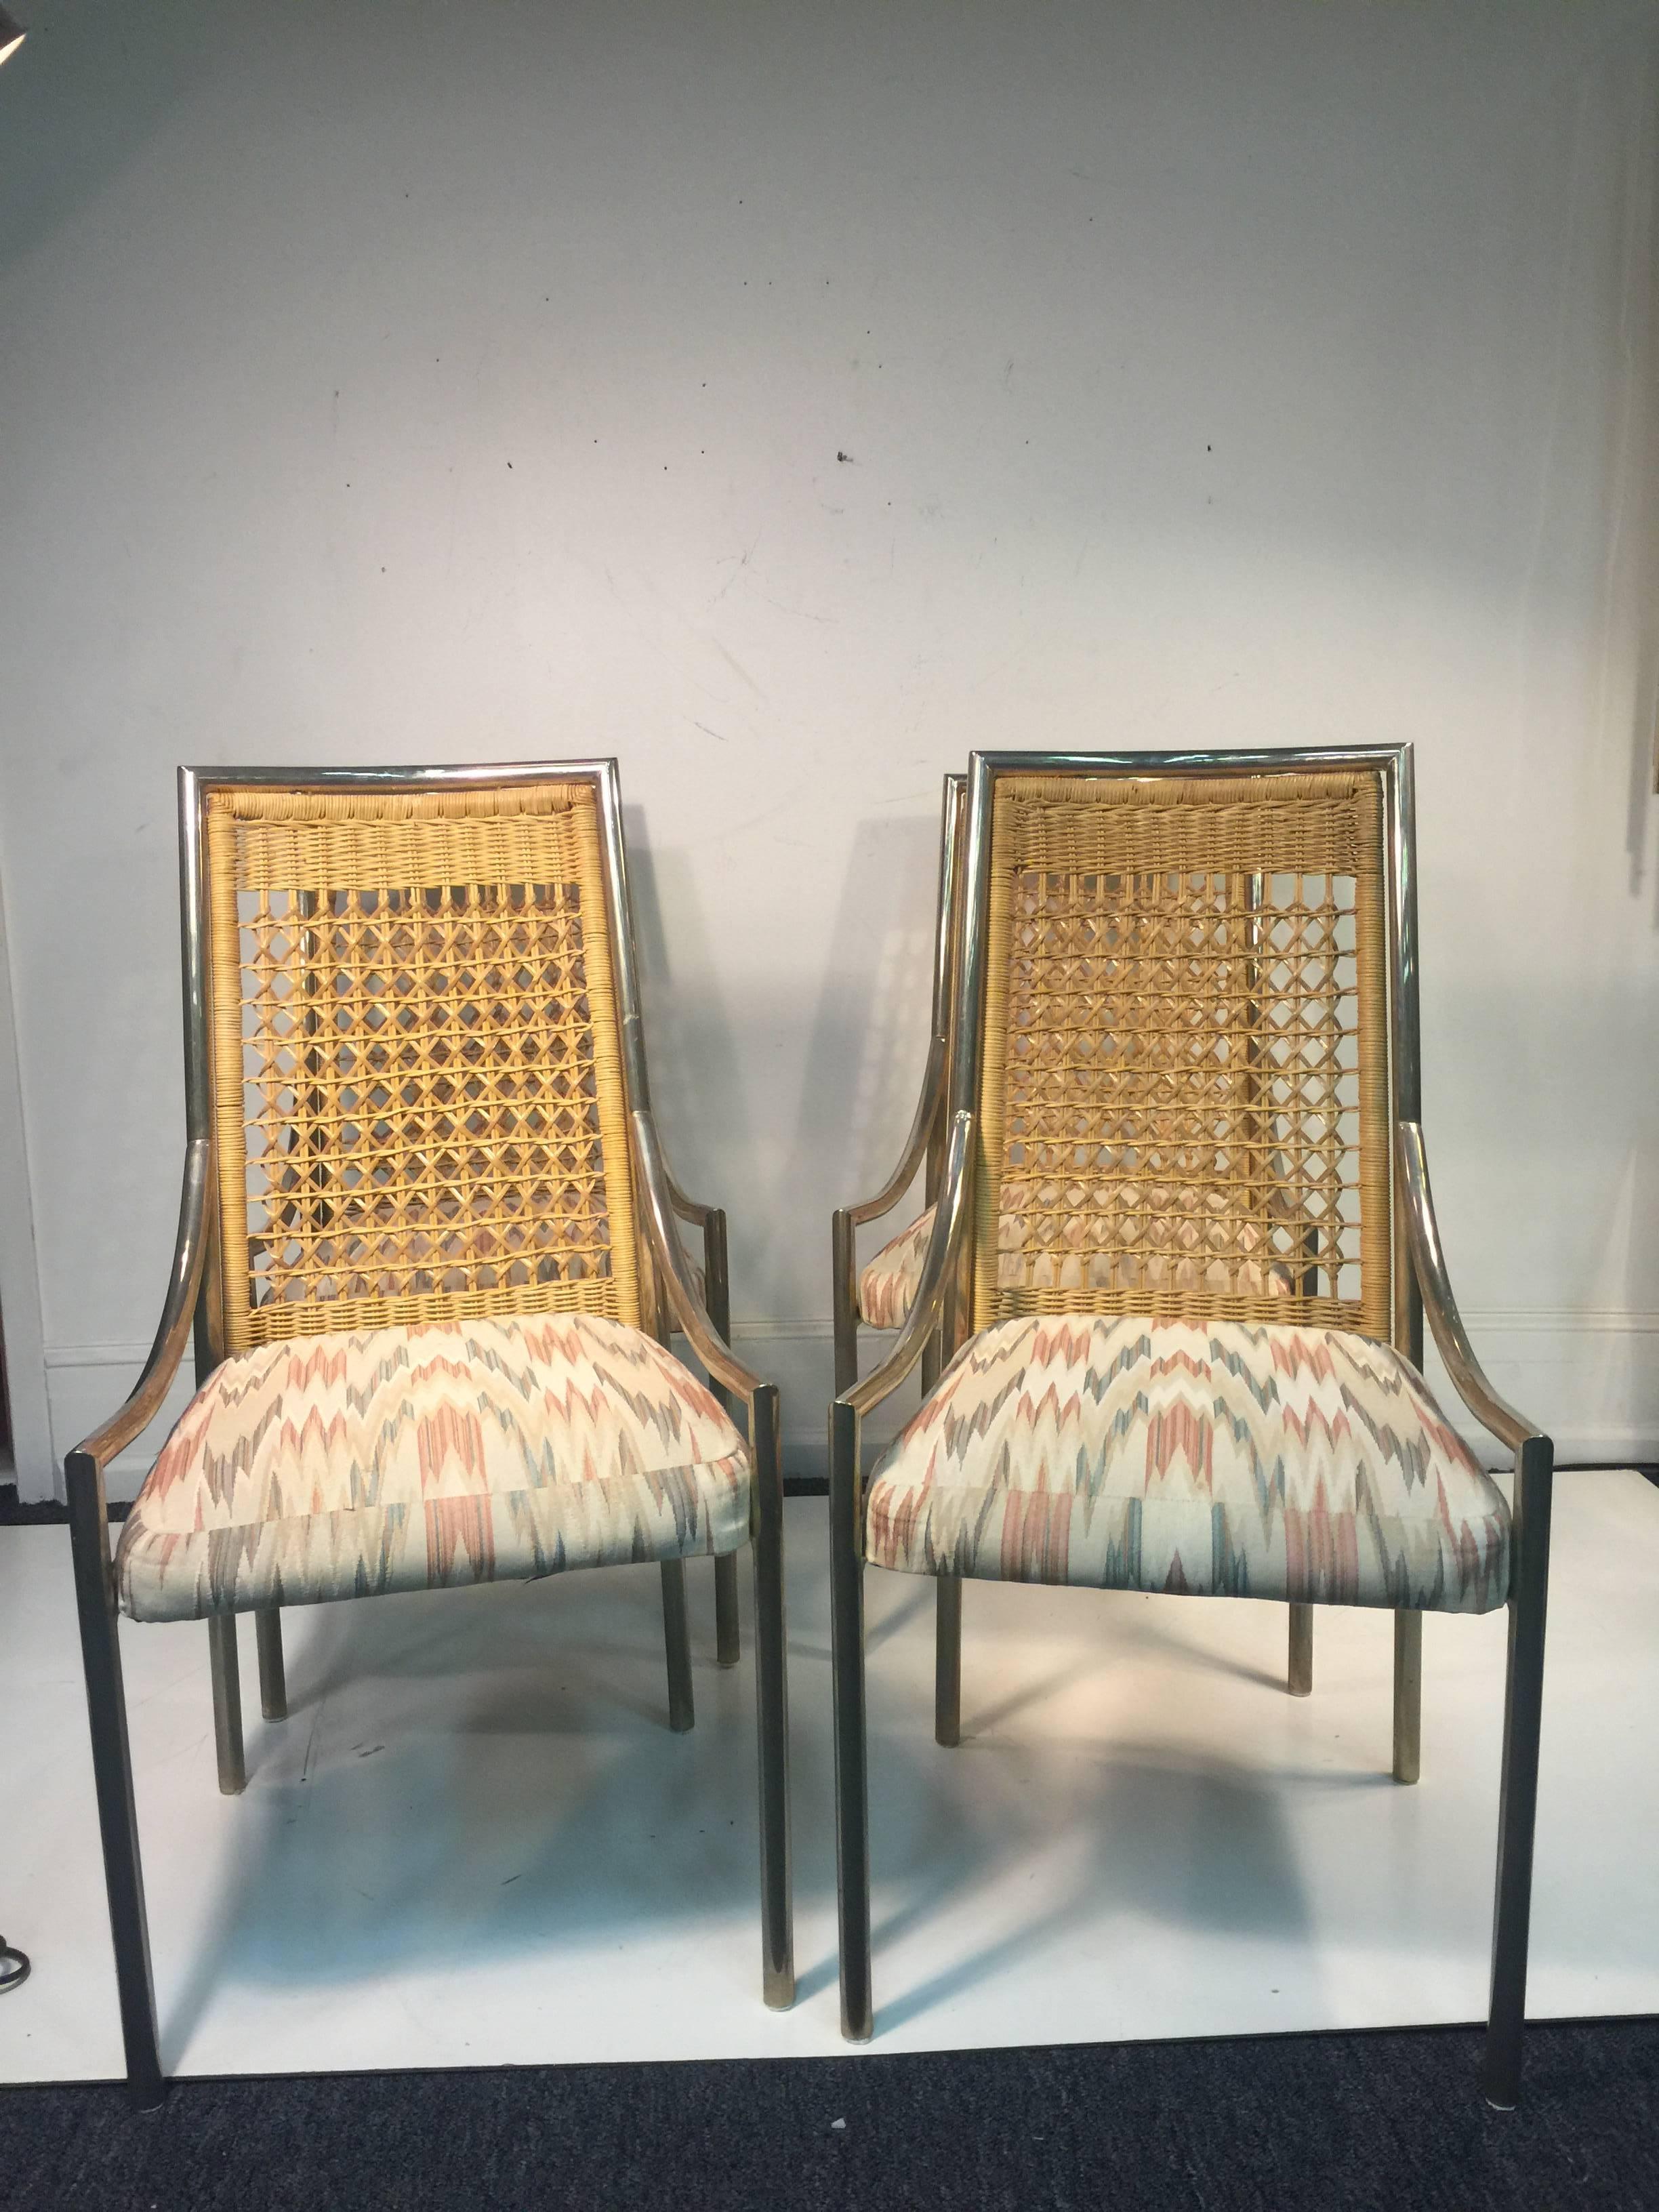 An elegant set of four rattan and chrome high back chairs with original fabric in the manner of Mastercraft, circa 1970. Good condition with age appropriate wear.